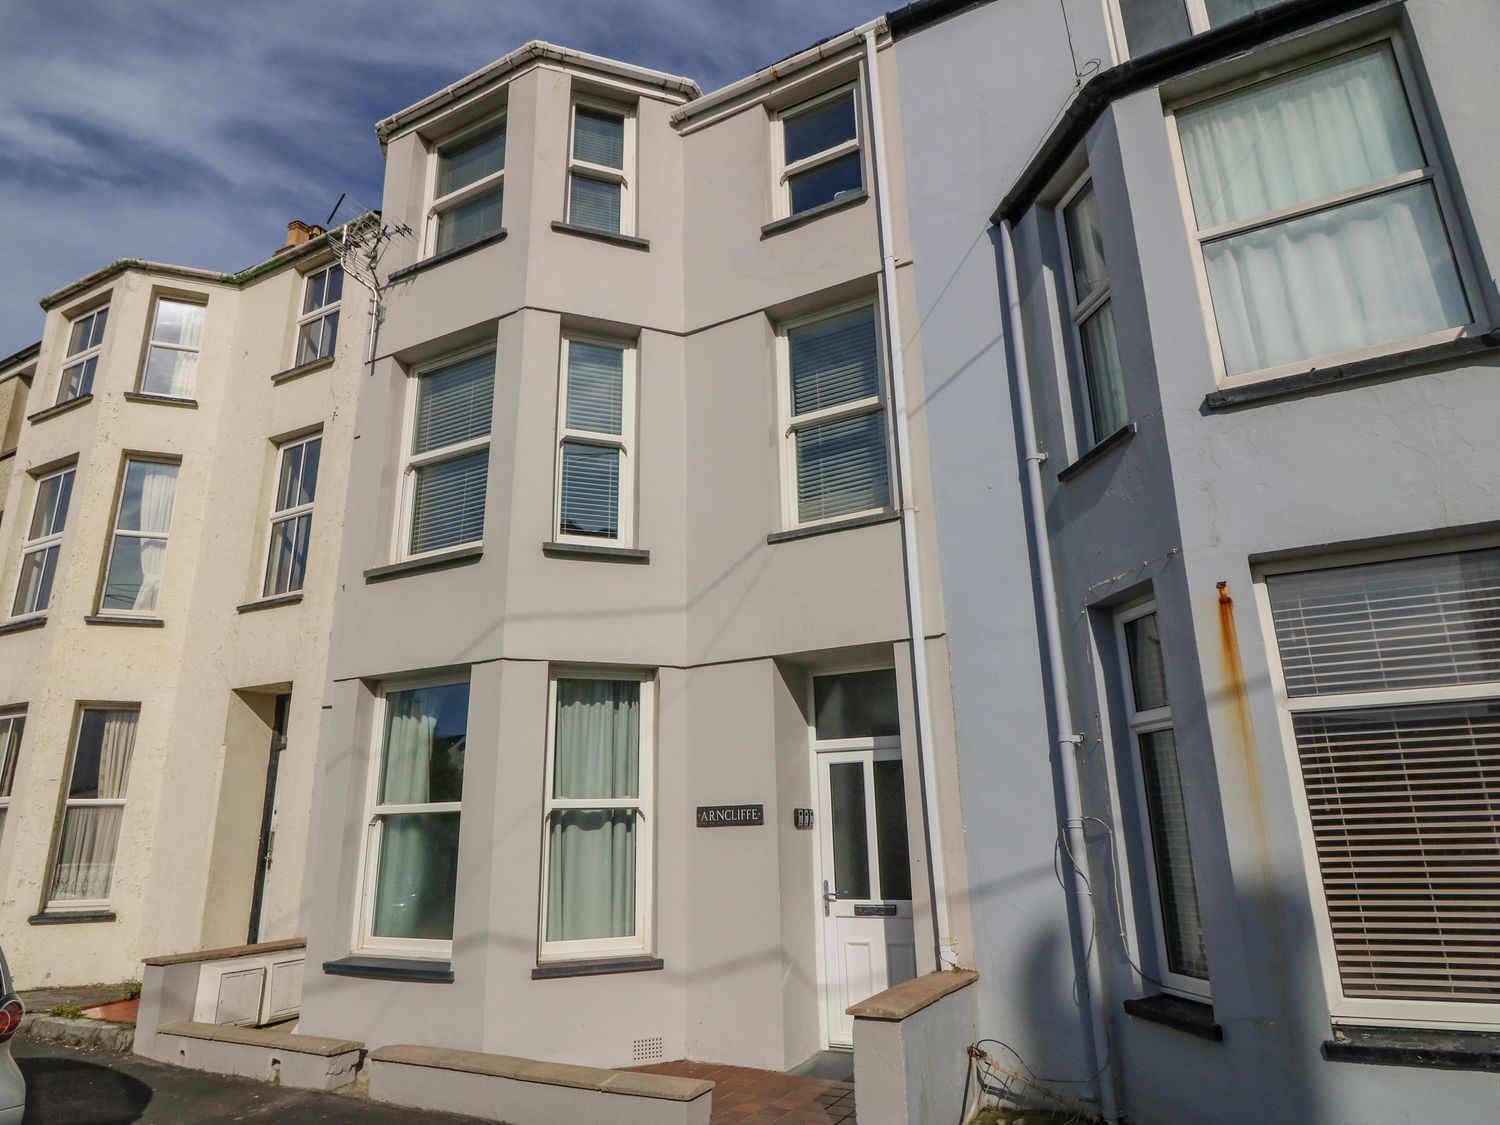 Y Castell Apartment 2 - North Wales - 926579 - photo 1